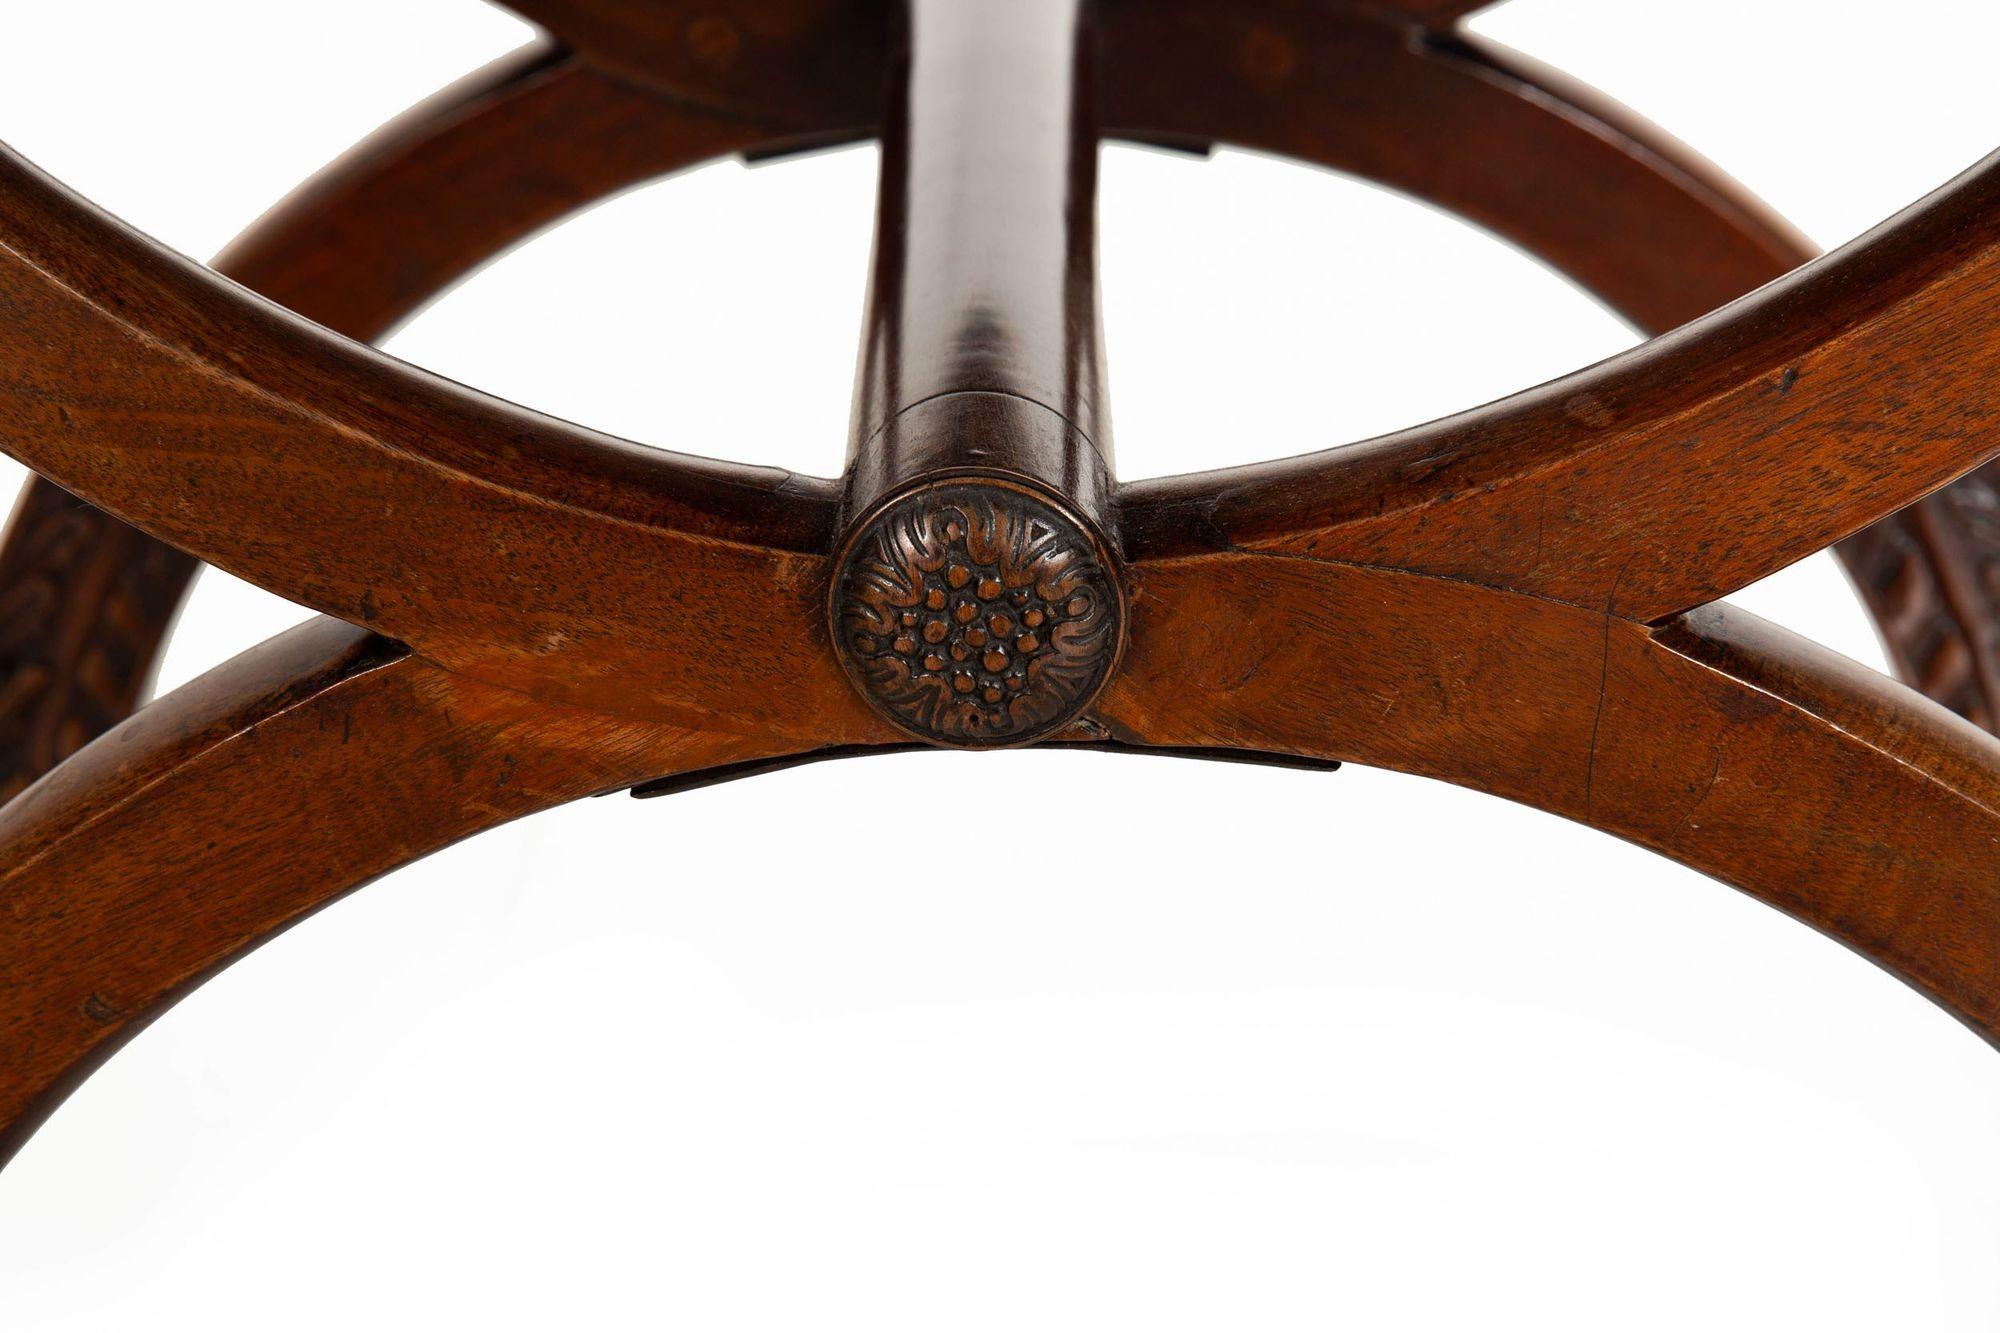 Fine English Regency Antique Mahogany Curule Curved Chair Bench c. 1815 For Sale 2